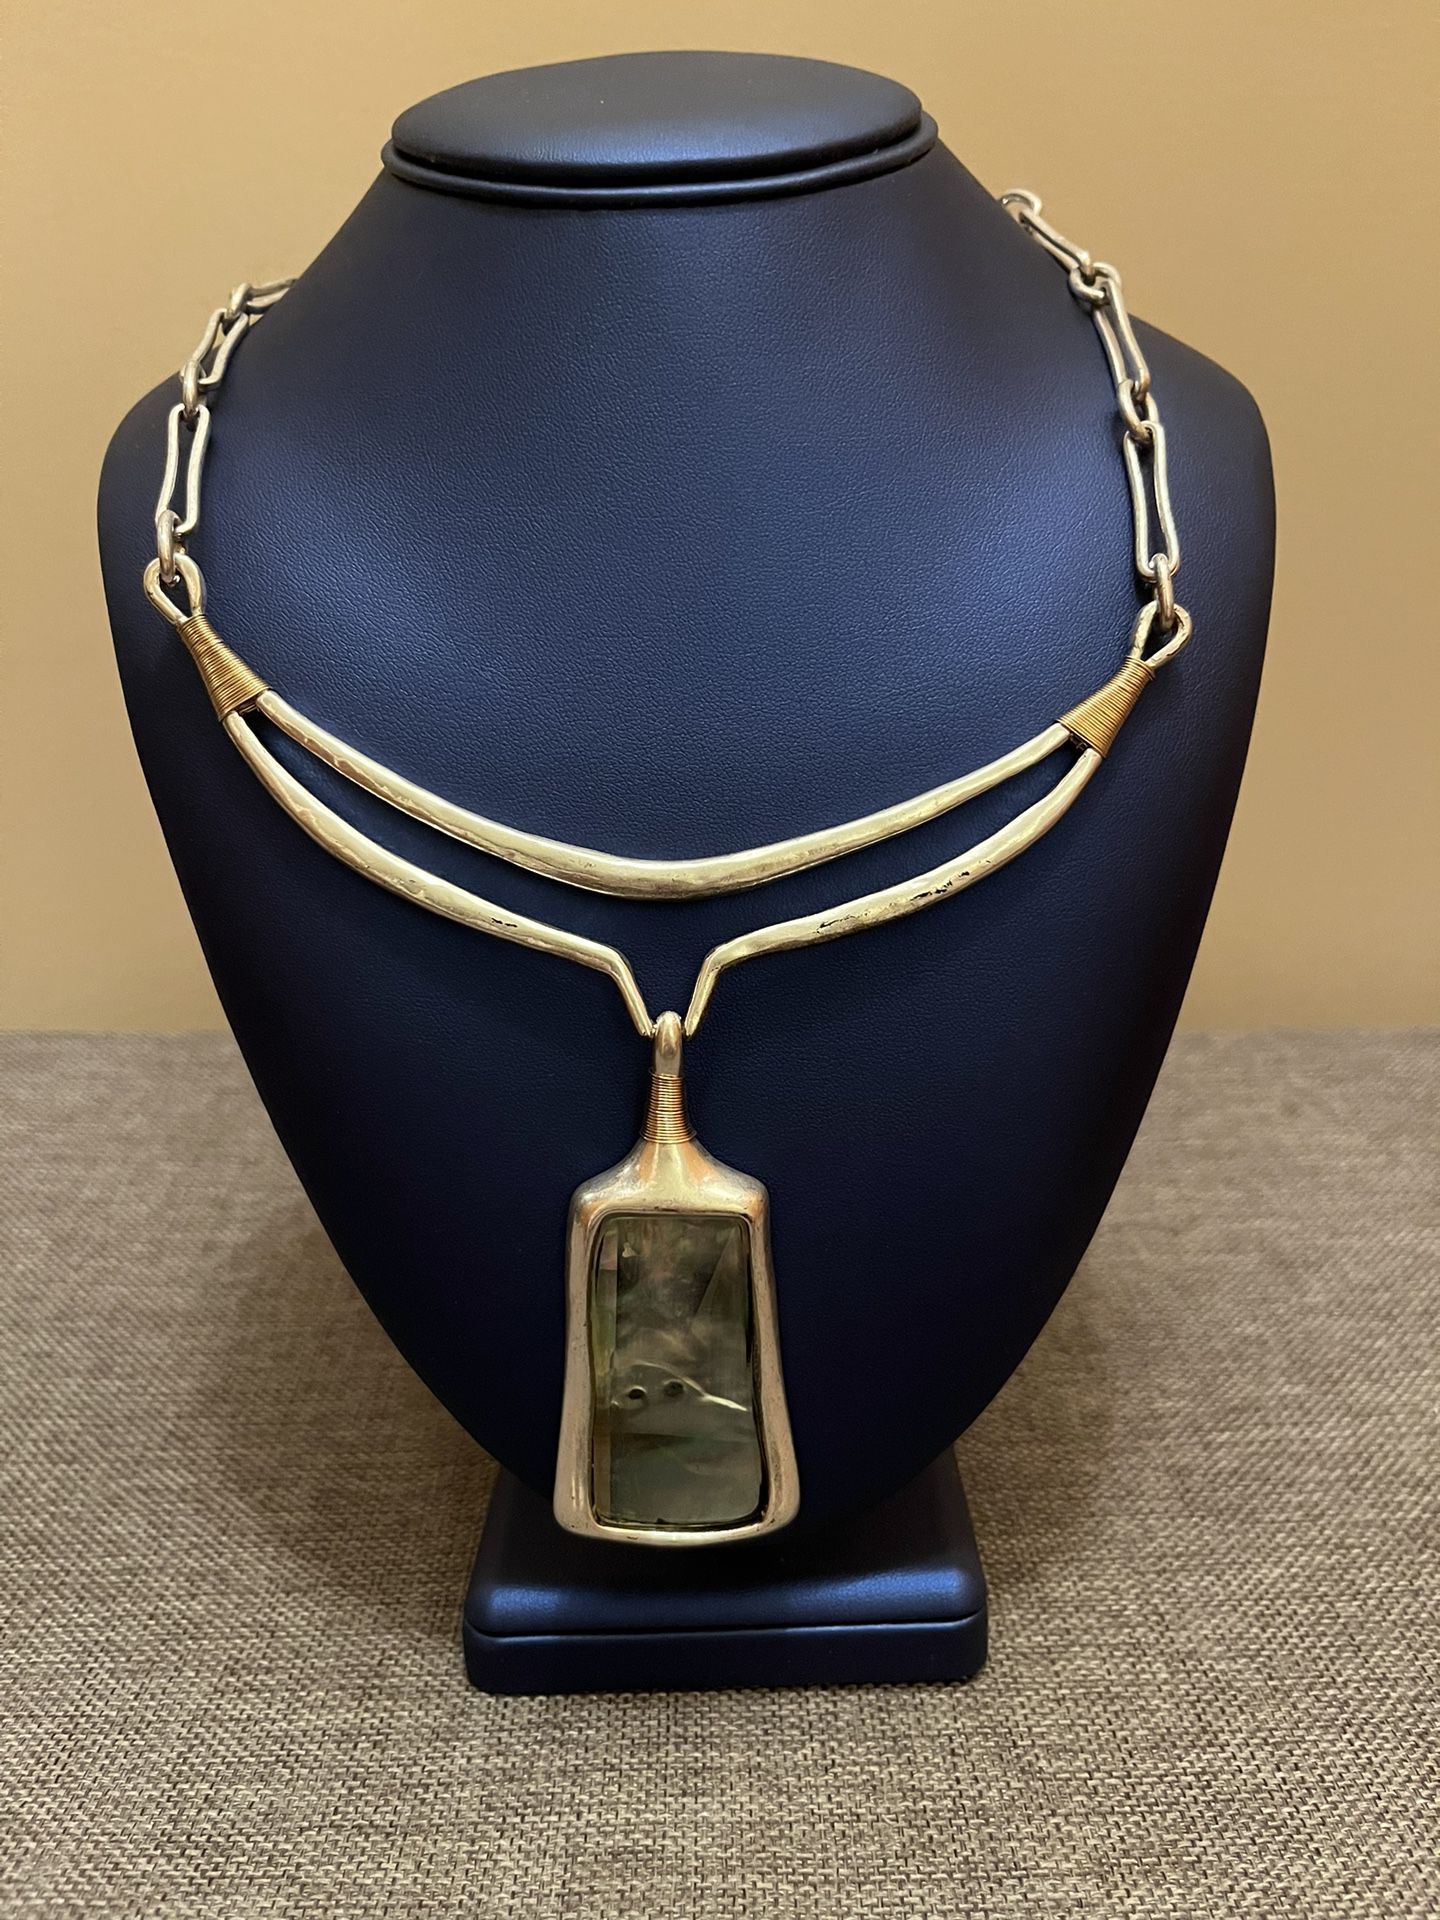 RLM SOHO Necklace by Robert Lee Morris Silverplate with Abalone Pendant